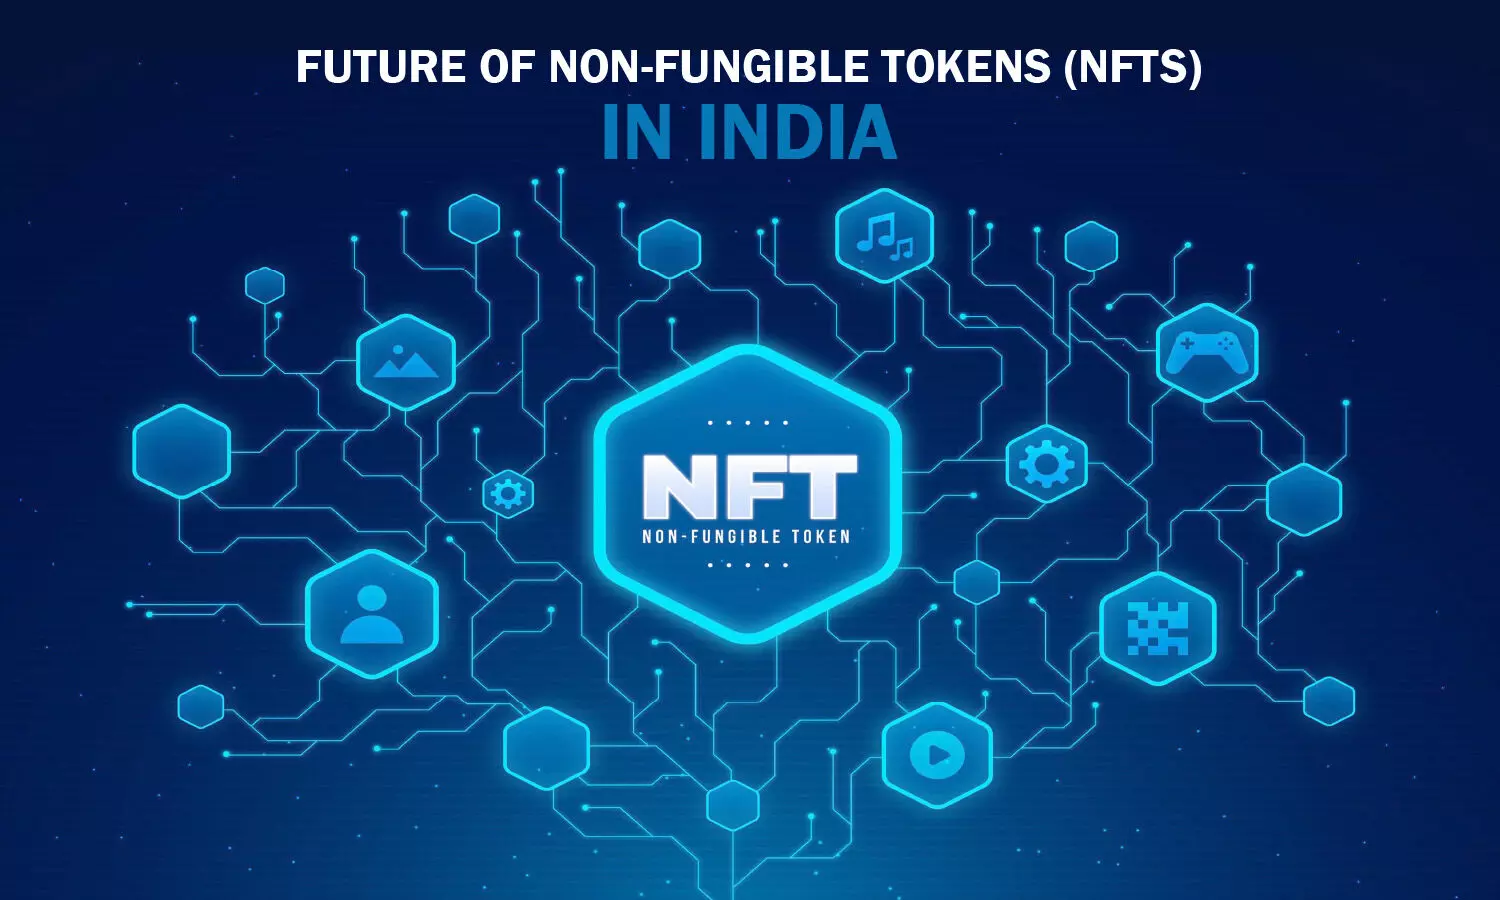 Future of Non-Fungible Tokens (NFTs) in India